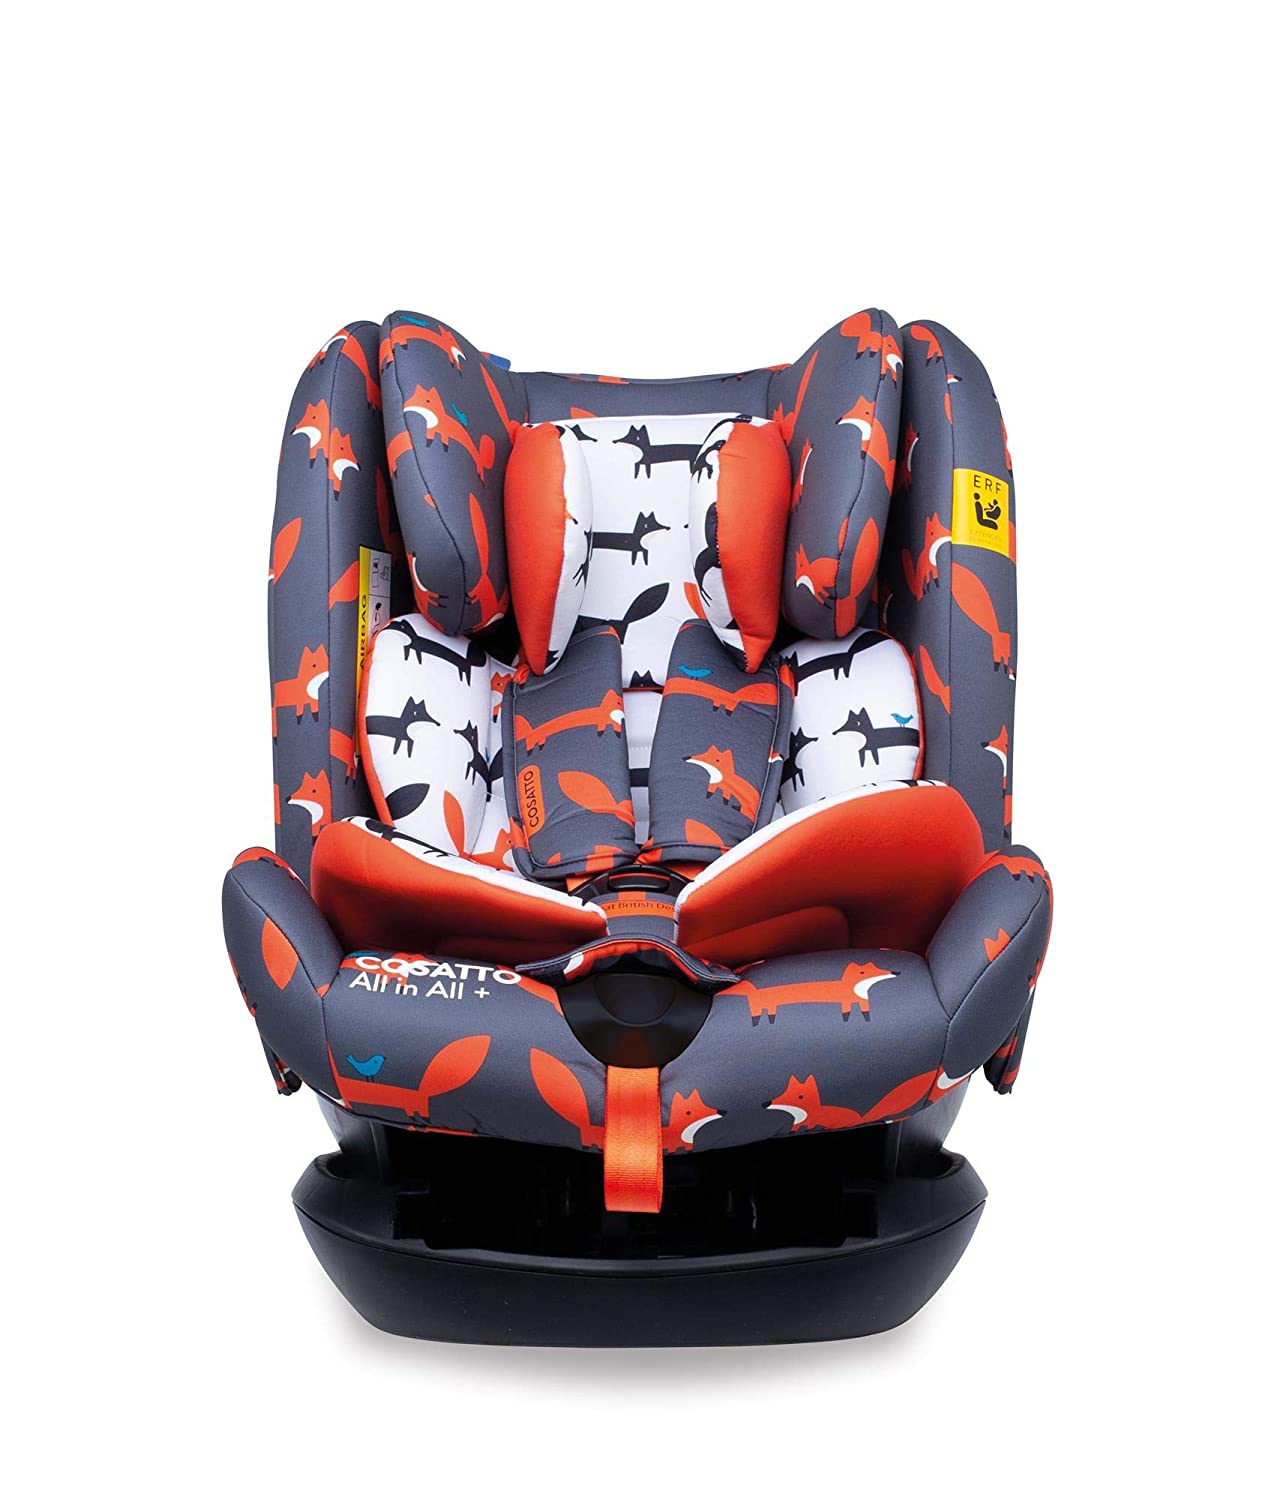 Cosatto All in All + Baby to Child Car Seat - Group 0+123, 0-36 kg, 0-12 years, ISOFIX, Extended Rear Facing, Anti-Escape, Reclines (Mister Fox)